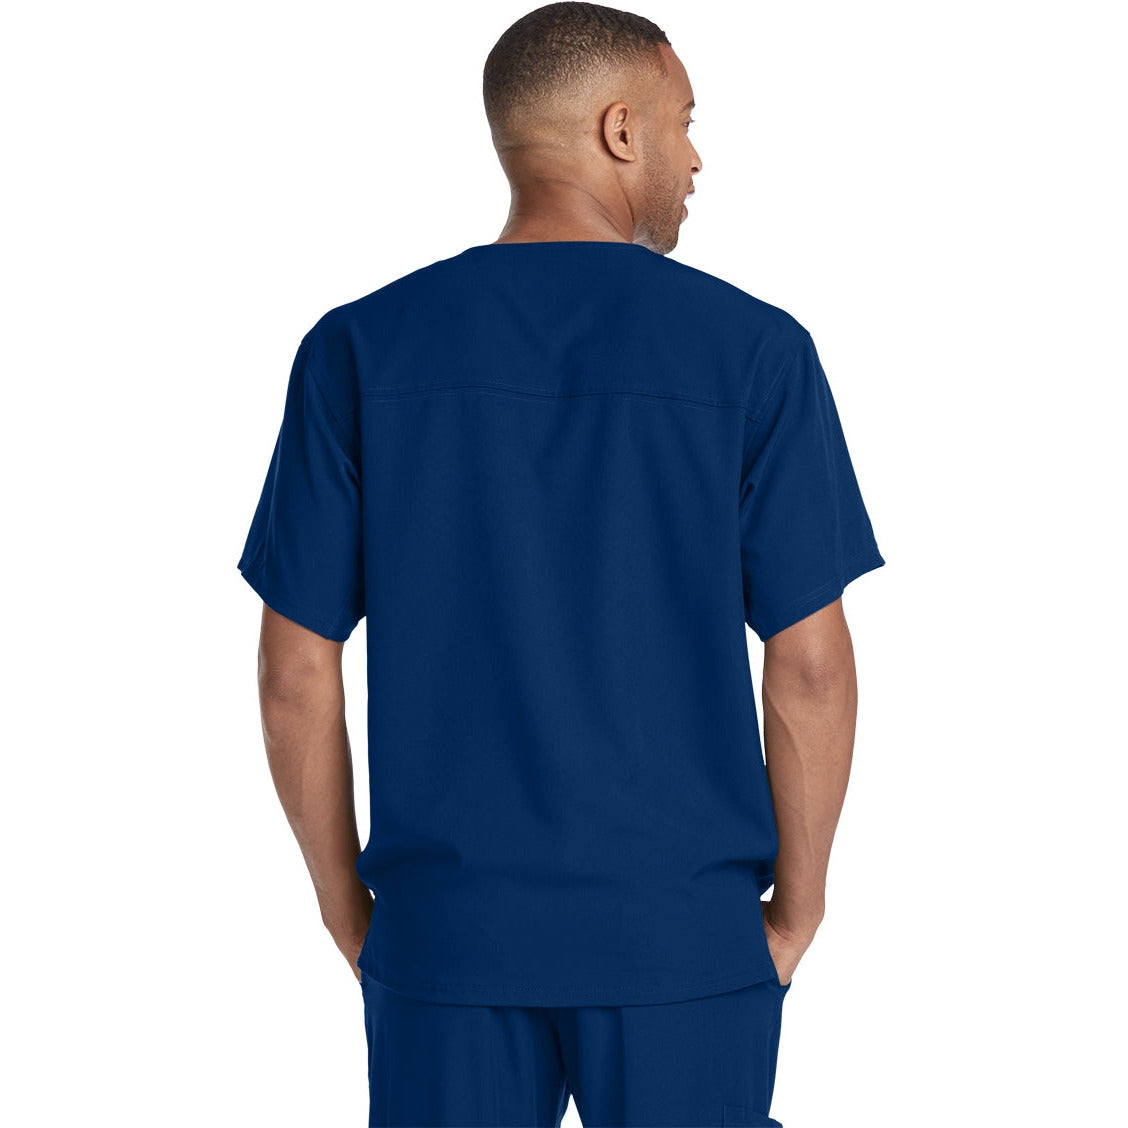 Skechers Structure Crossover Scrub Top